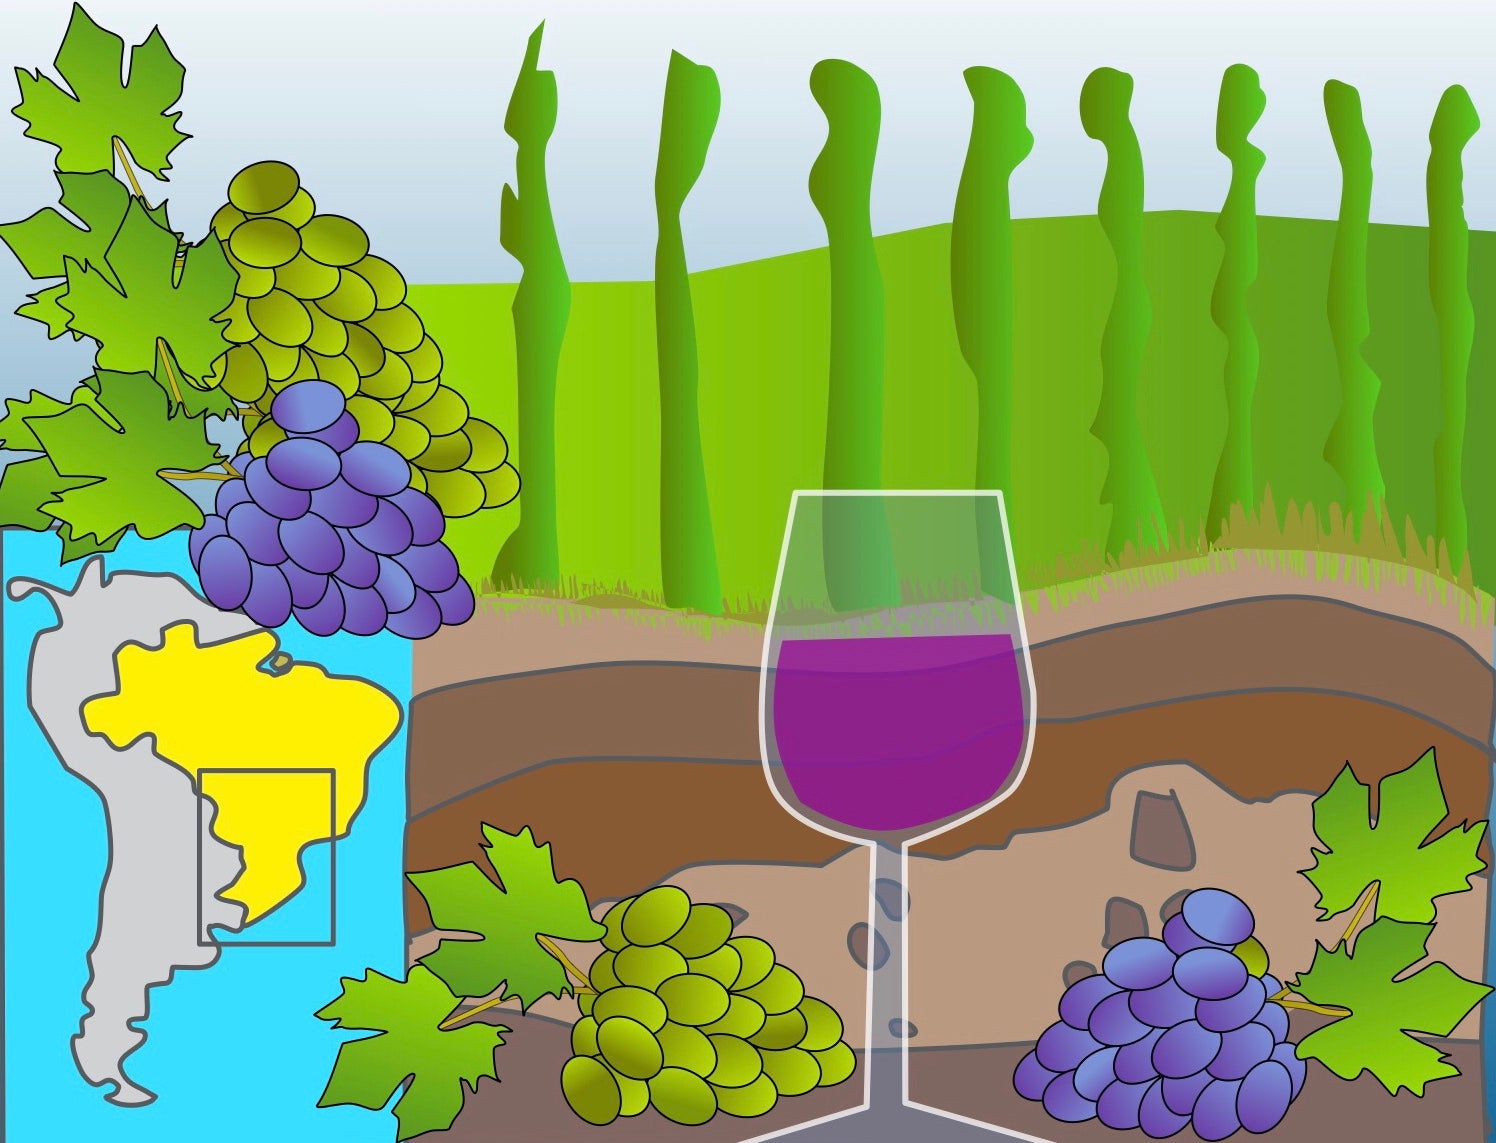 Illustration of a map showing Southern Brazil, alongside grapes and a glass of wine